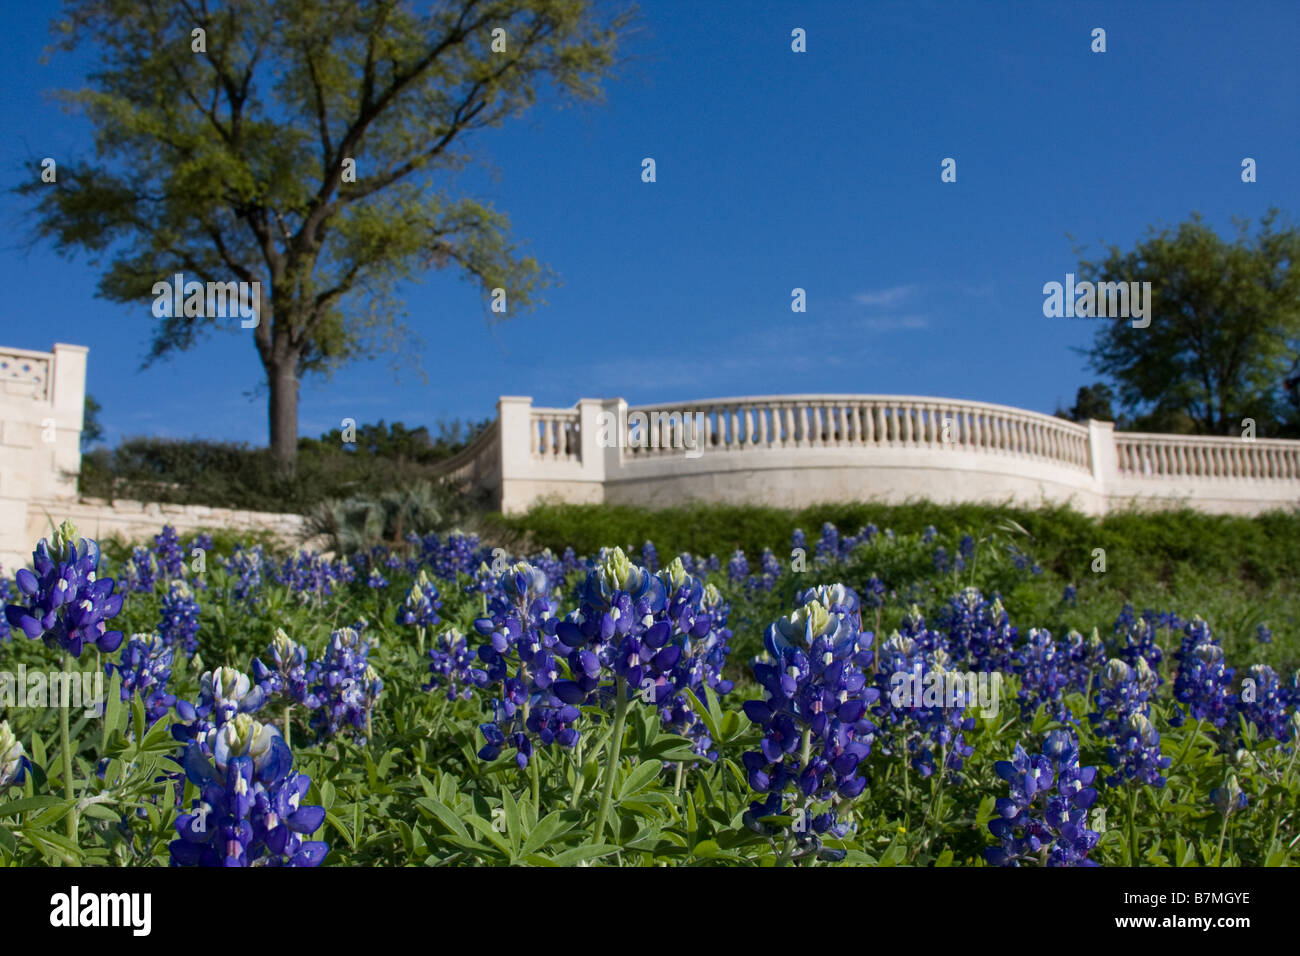 Bluebonnets on a hill in front of a stone patio. Stock Photo